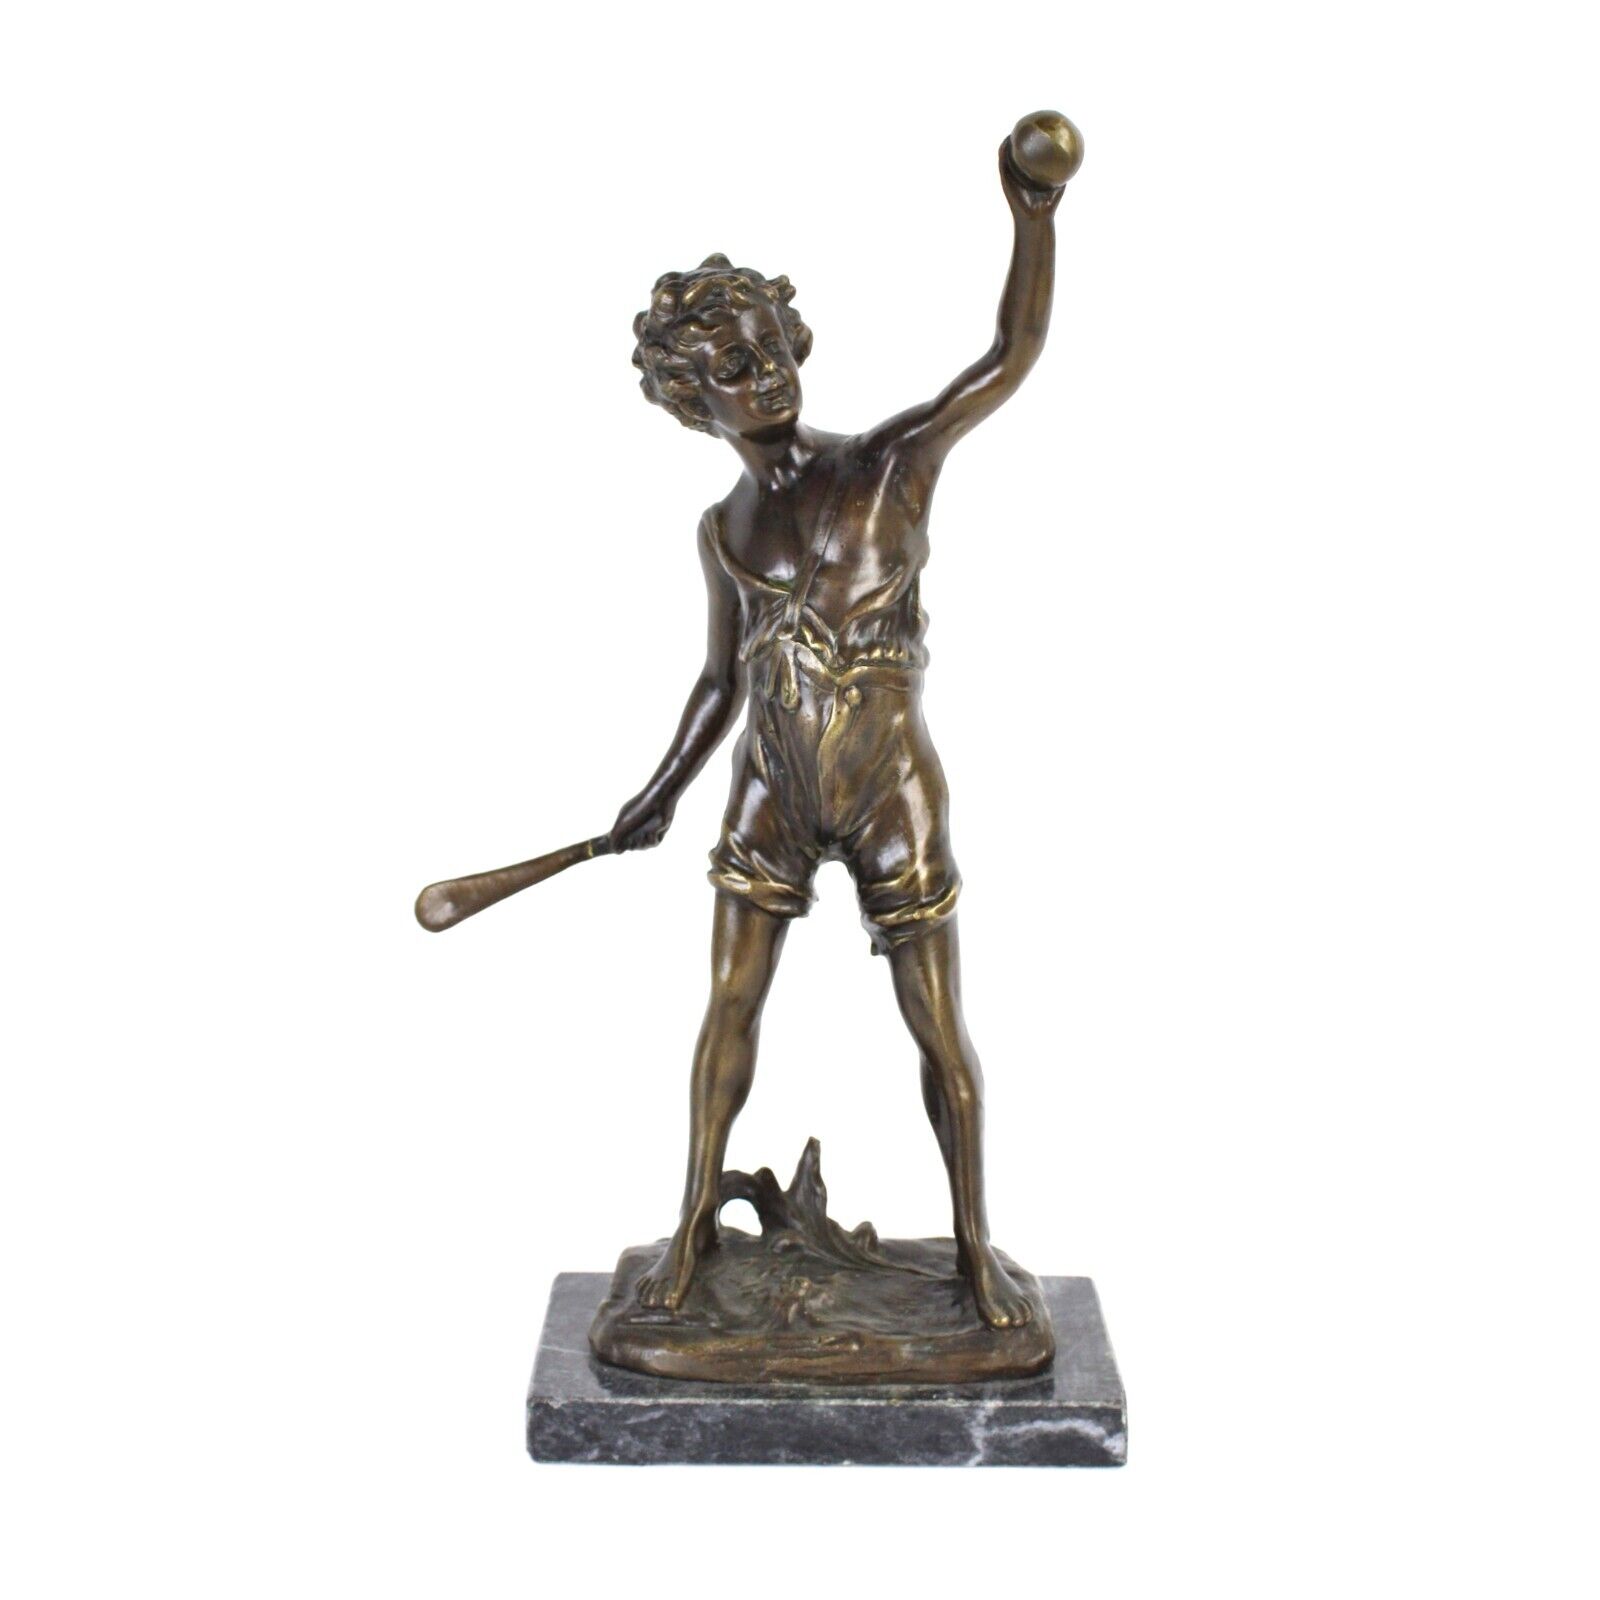 Antique Bronze Sculpture Young Boy Babe Ruth with Bat and Ball by Franz Iffland